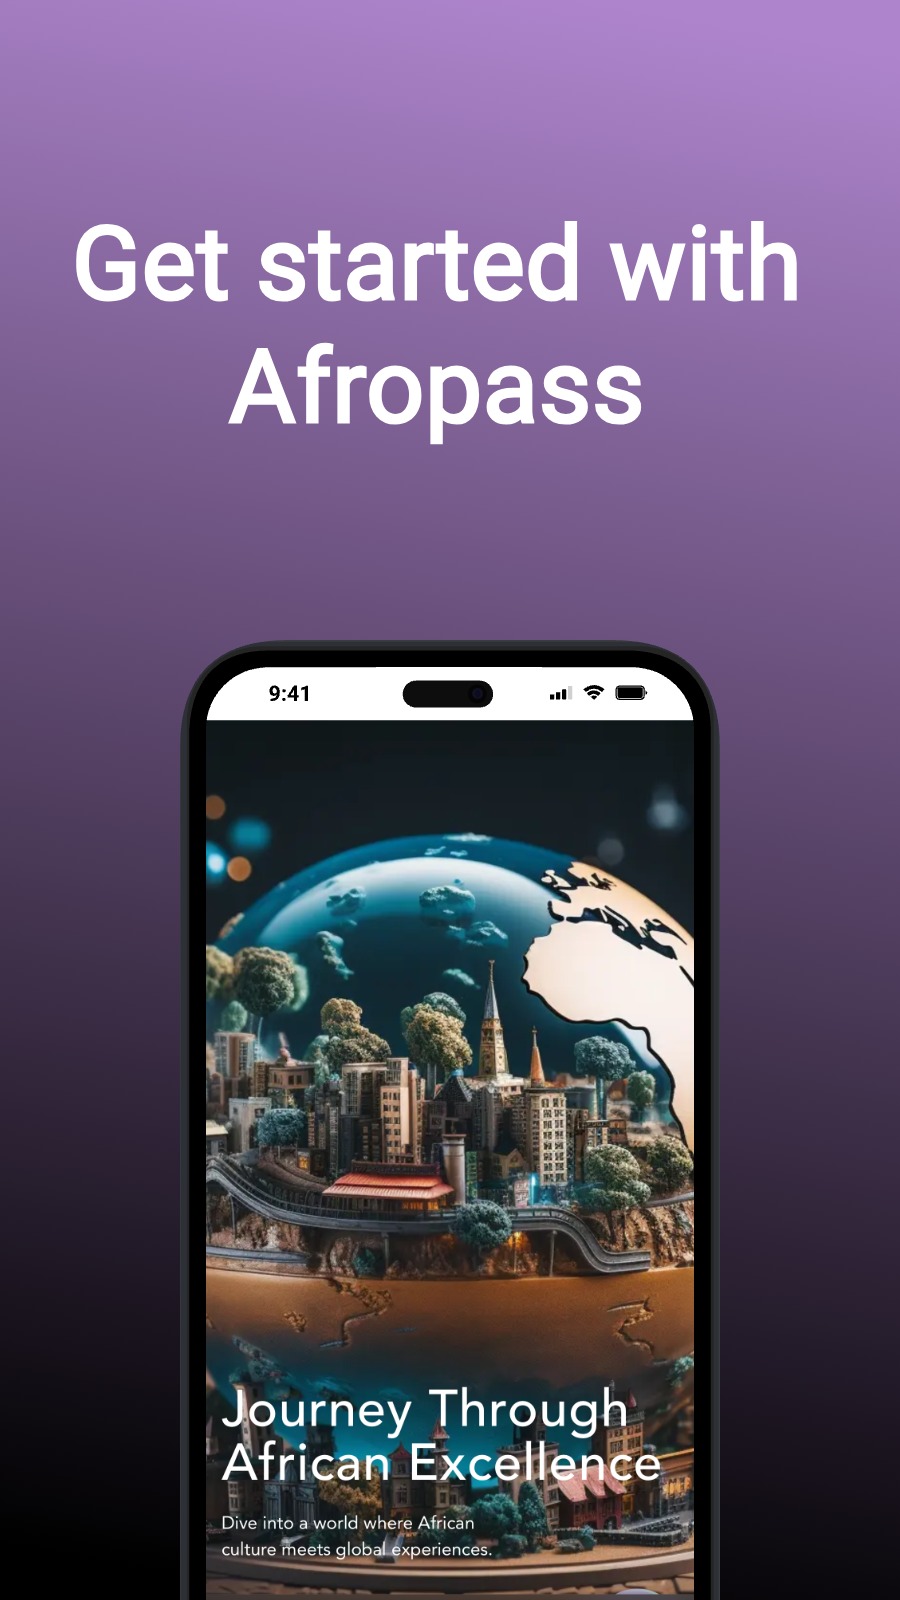 Get started with Afropass